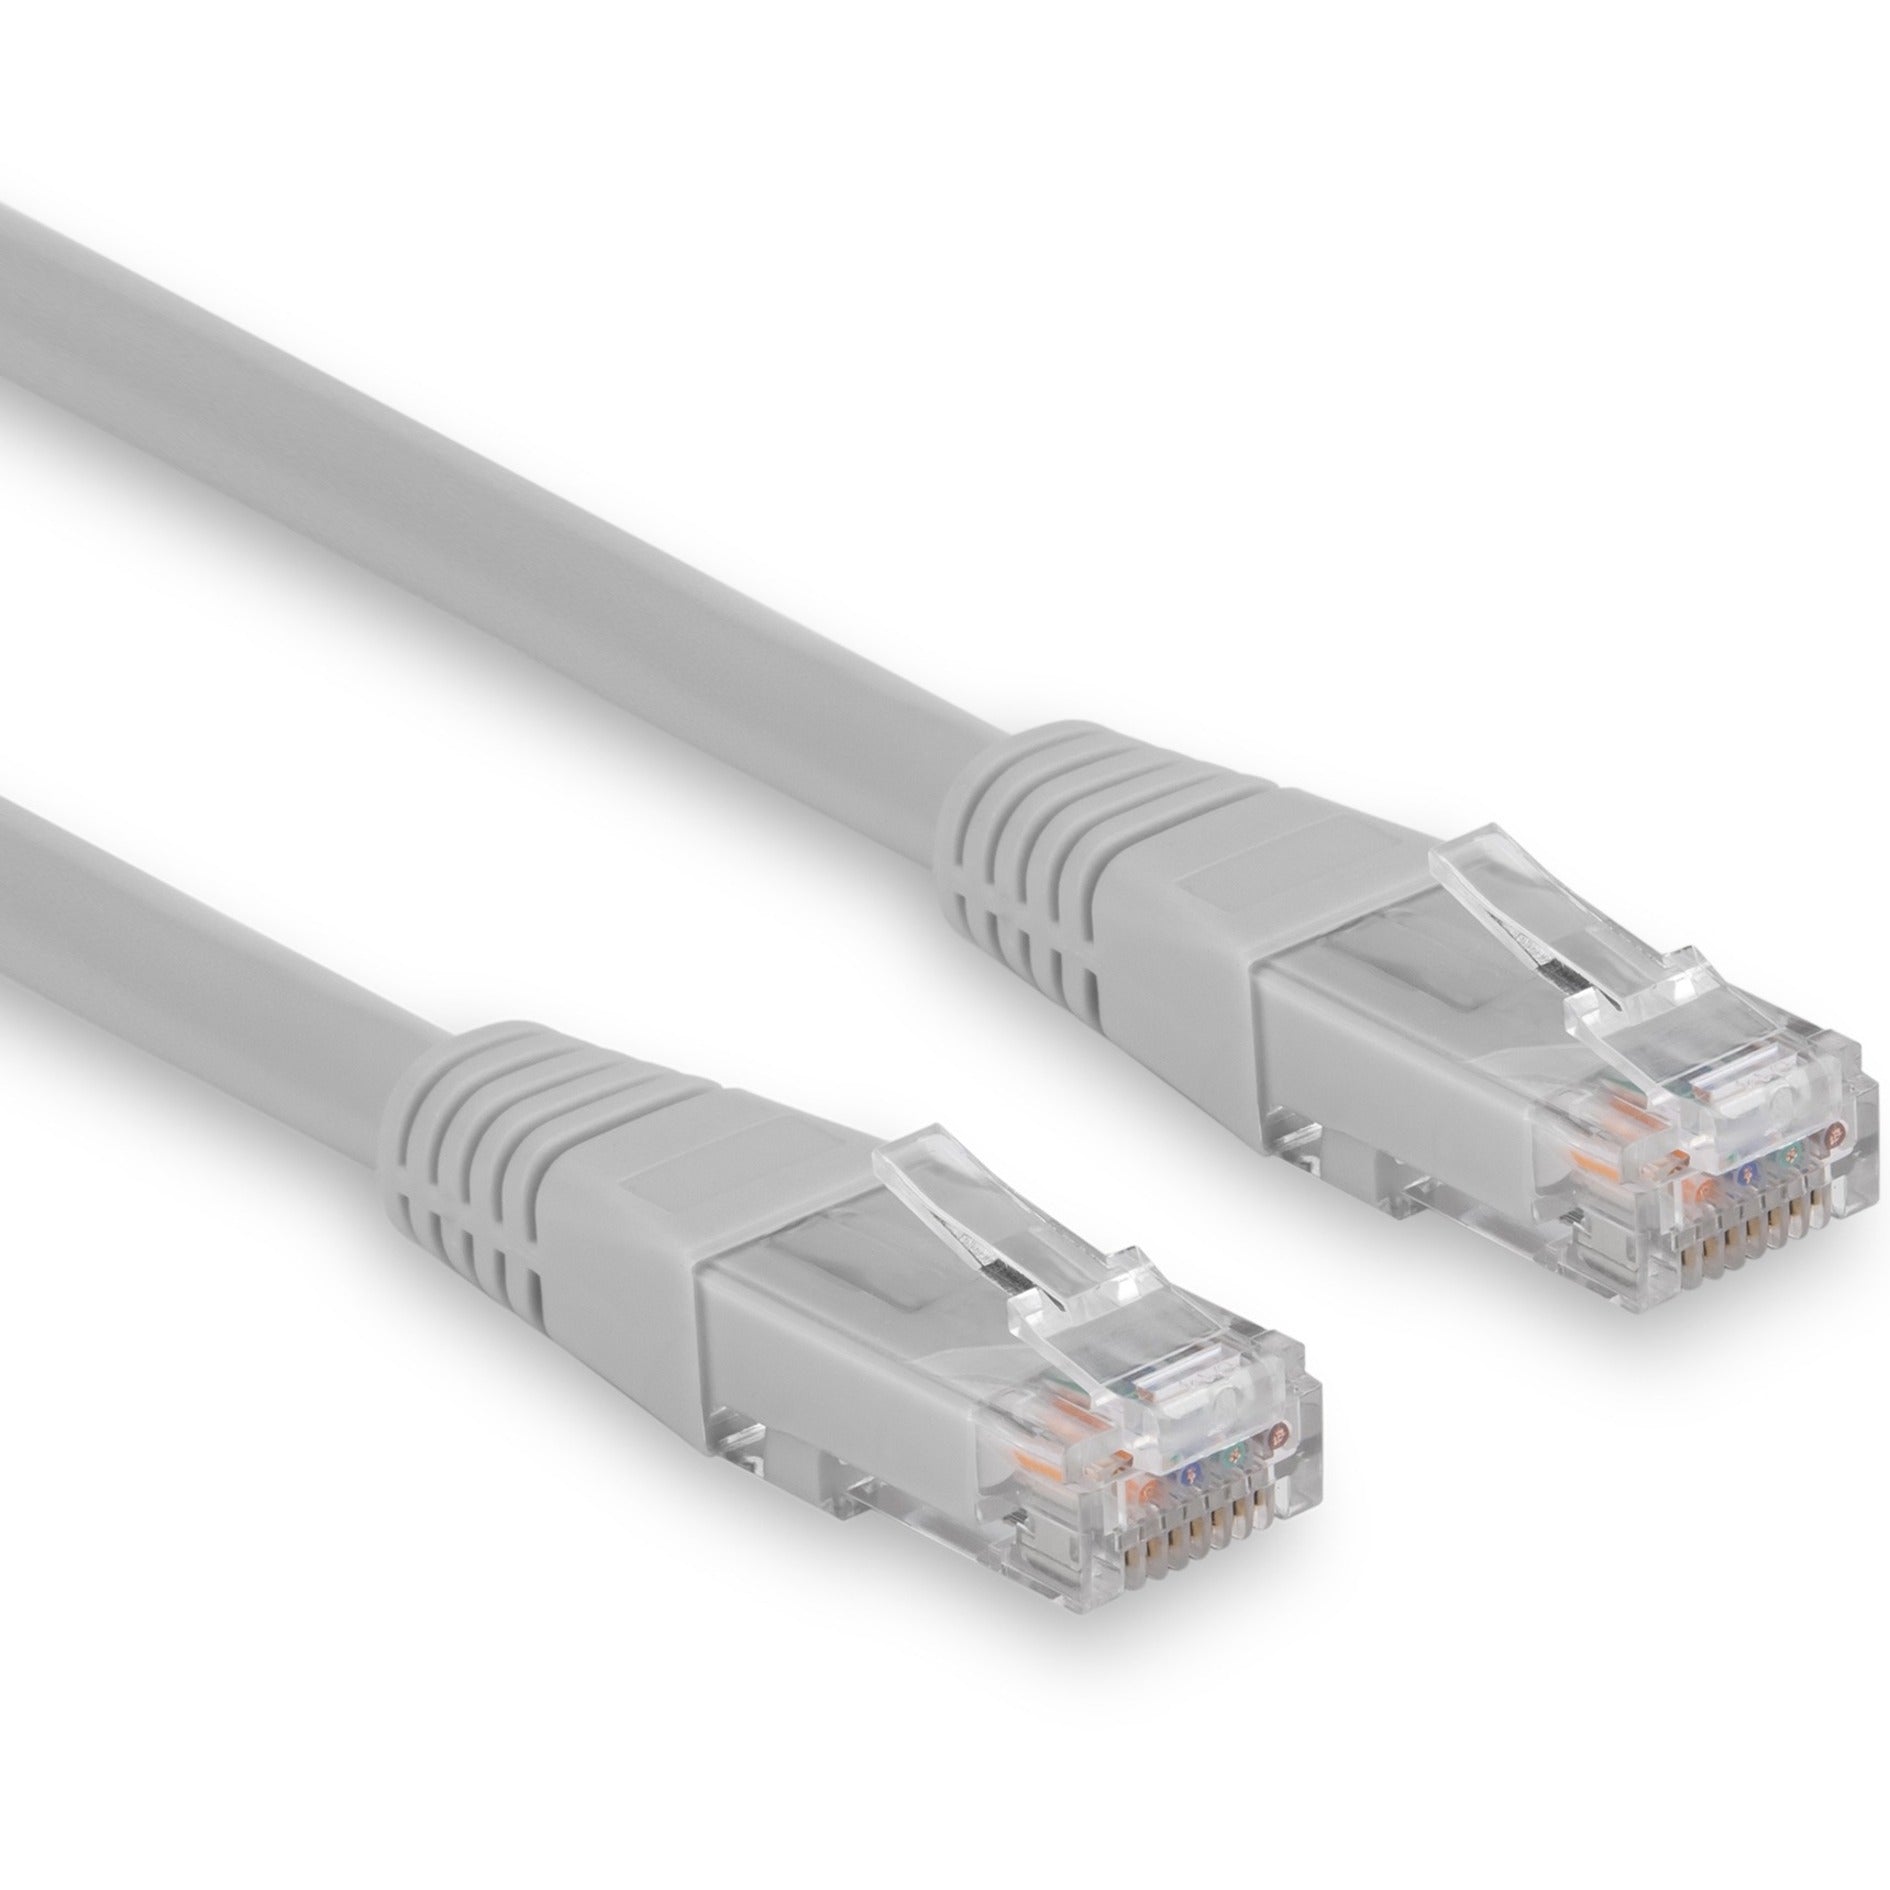 Rocstor Y10C424-GY Cat.6 Network Cable, 20 ft, 10 Gbit/s, Molded Boot, Gray